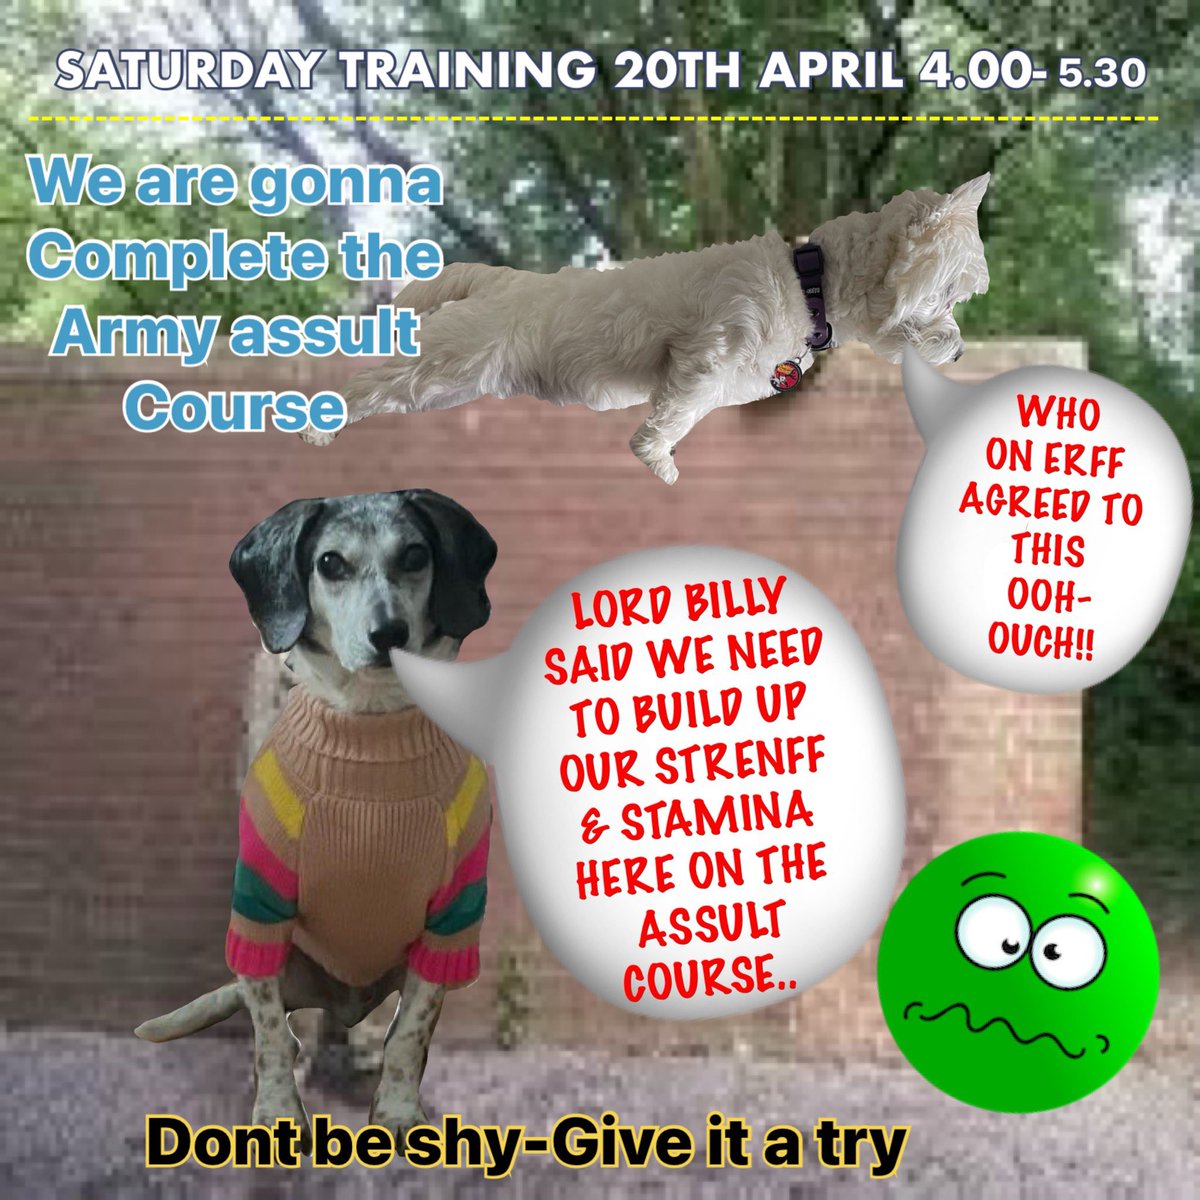 #zshq 😀😃😄😁😆🥹😅😂🤣🥲☺️😊😇🙂🙃@Helen09Porter Oh lard........ yepp our great founder and his nephew lord Billy have been watching us😱😳 Yepp they recommend we improve our strenff & stamina Yepp we gonna do it! WE GONNA DO AN ASSULT COURSE.....☺️😉 WE CAN DO THIS